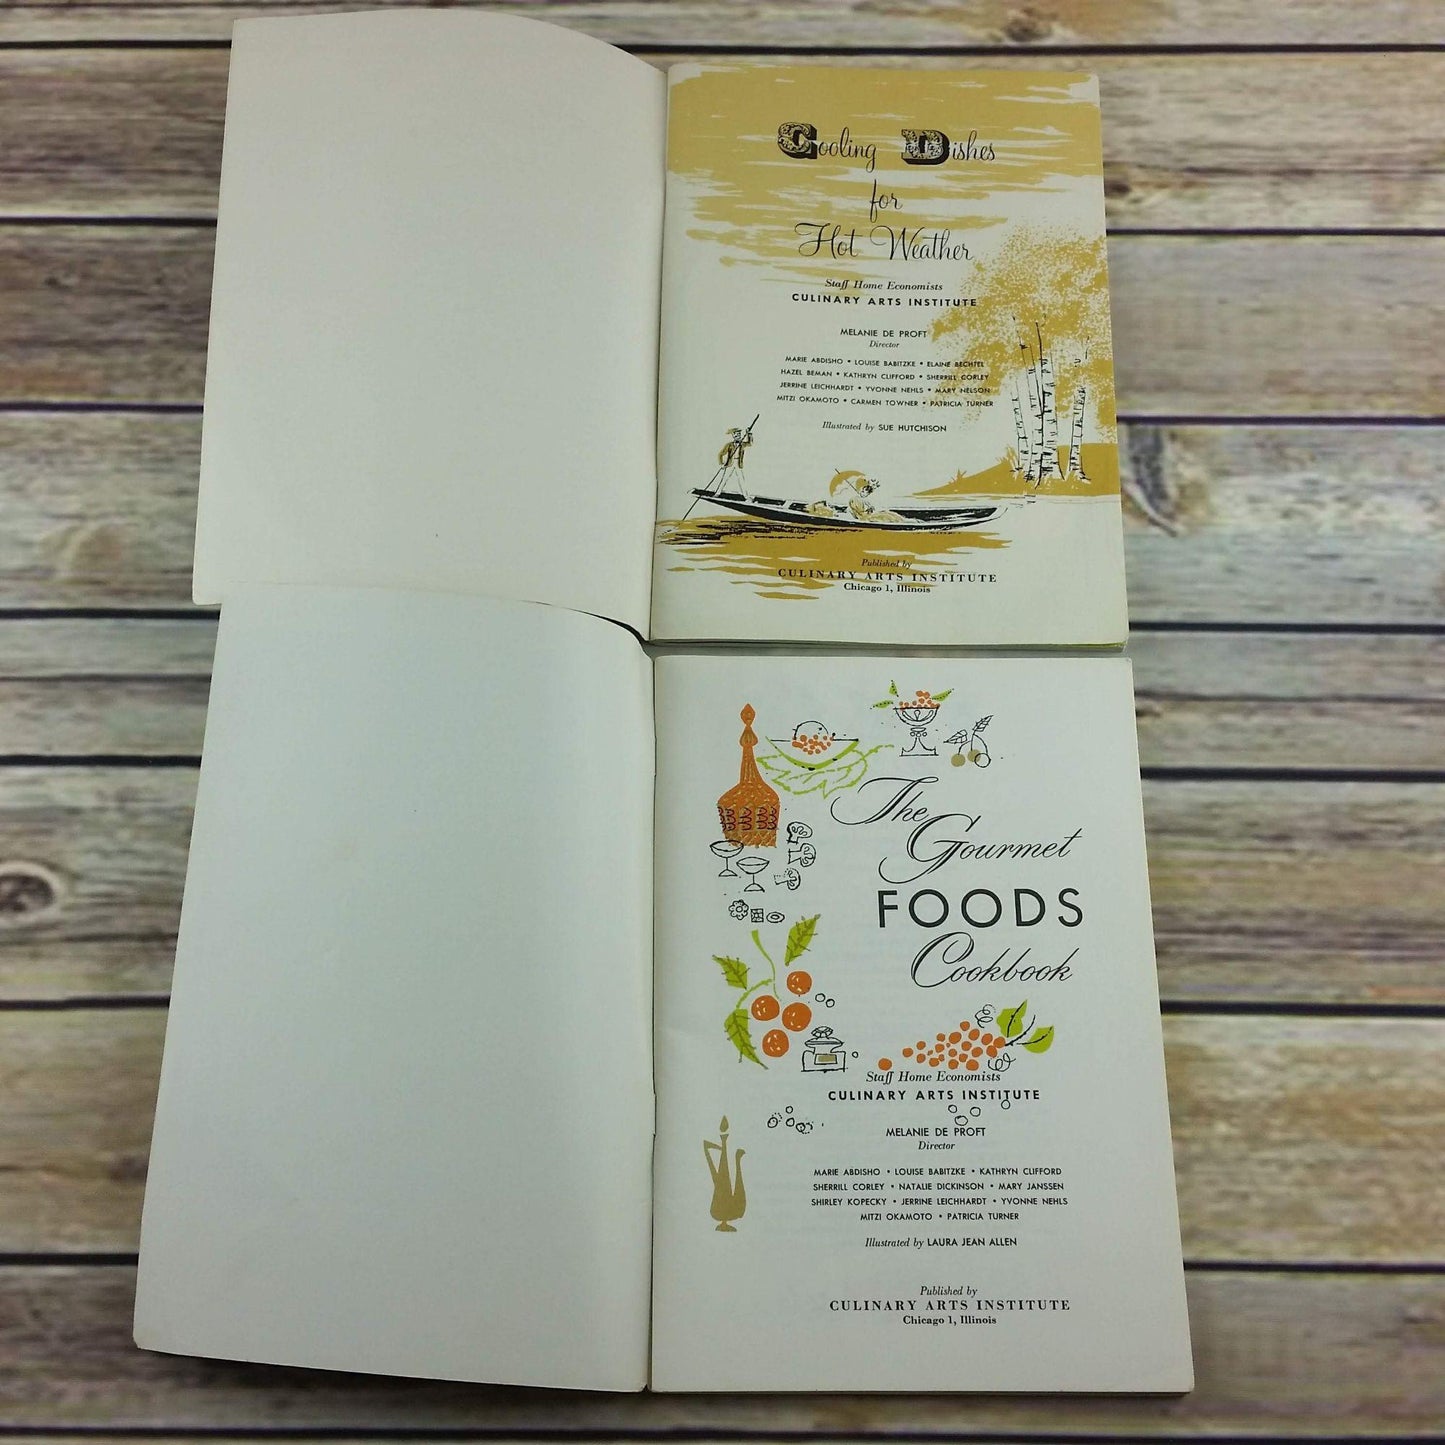 Vintage Cookbooks Lot of 2 Culinary Arts Institute Gourmet Foods Cooling Dishes Paperback Booklets